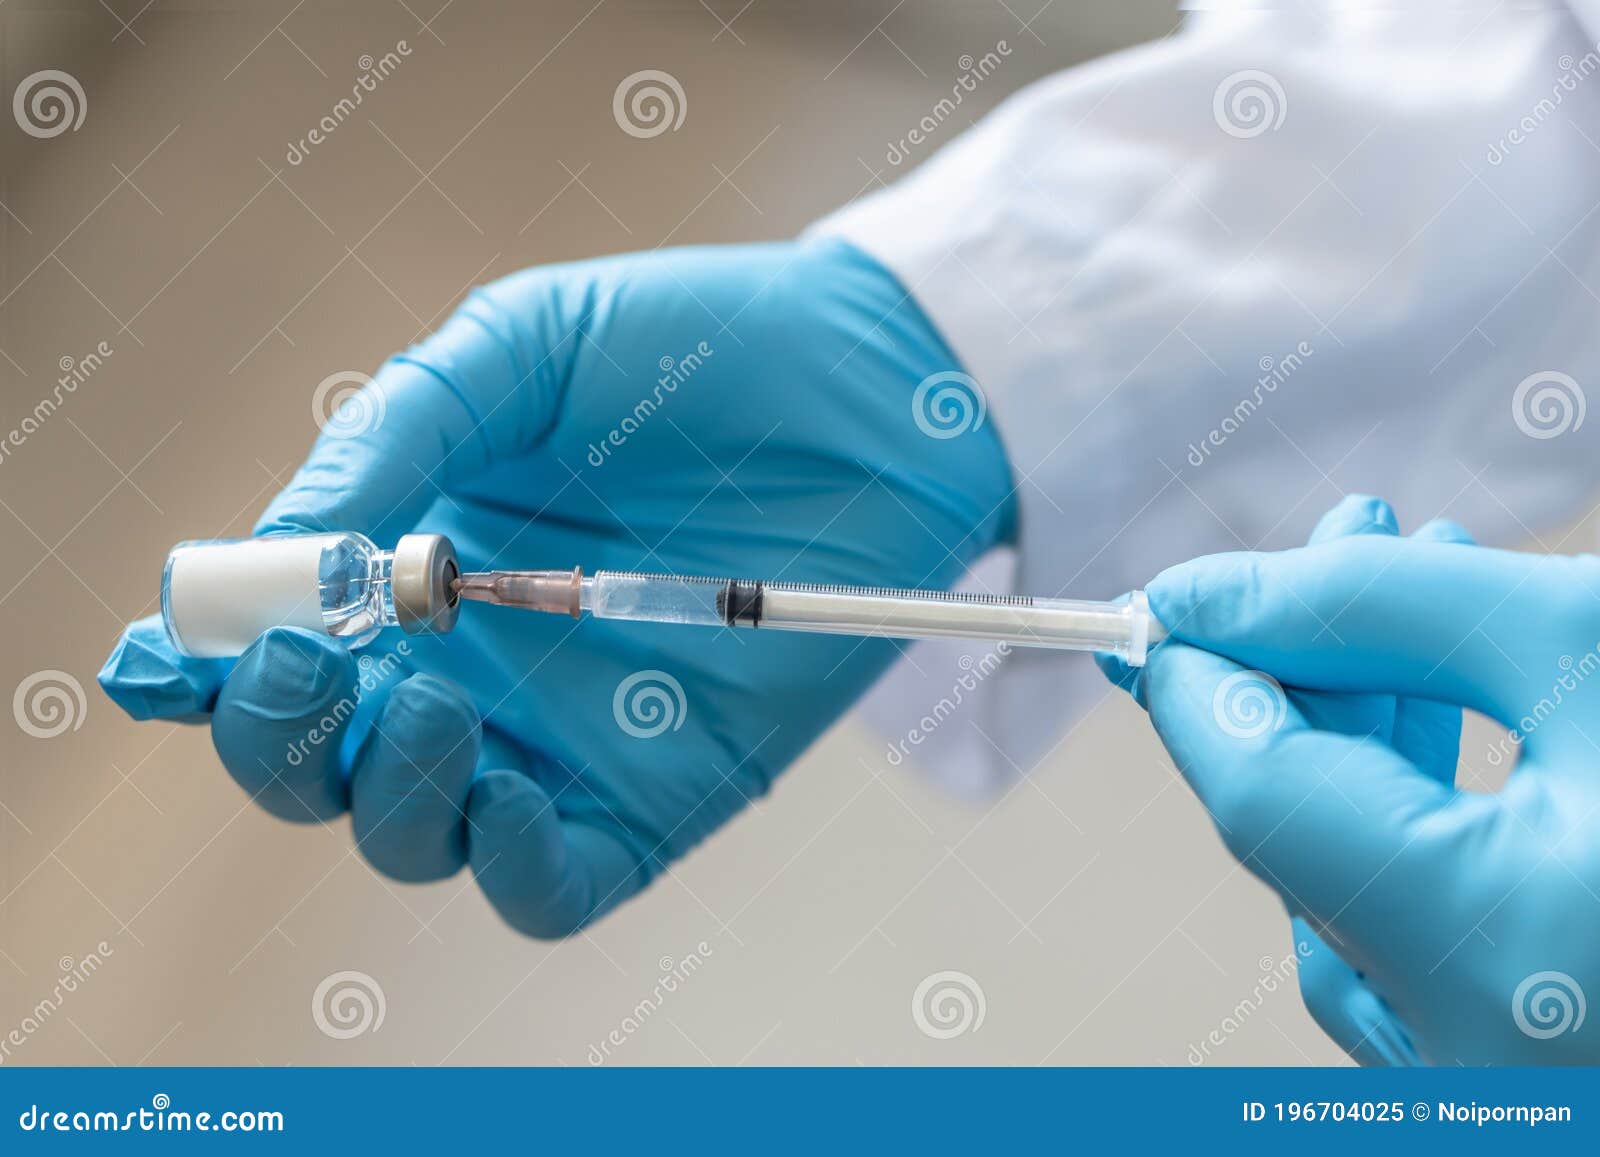 vaccine for vaccination, medical immunization for patient treatment from disease such as coronavirus, covid-19, cervical cancer